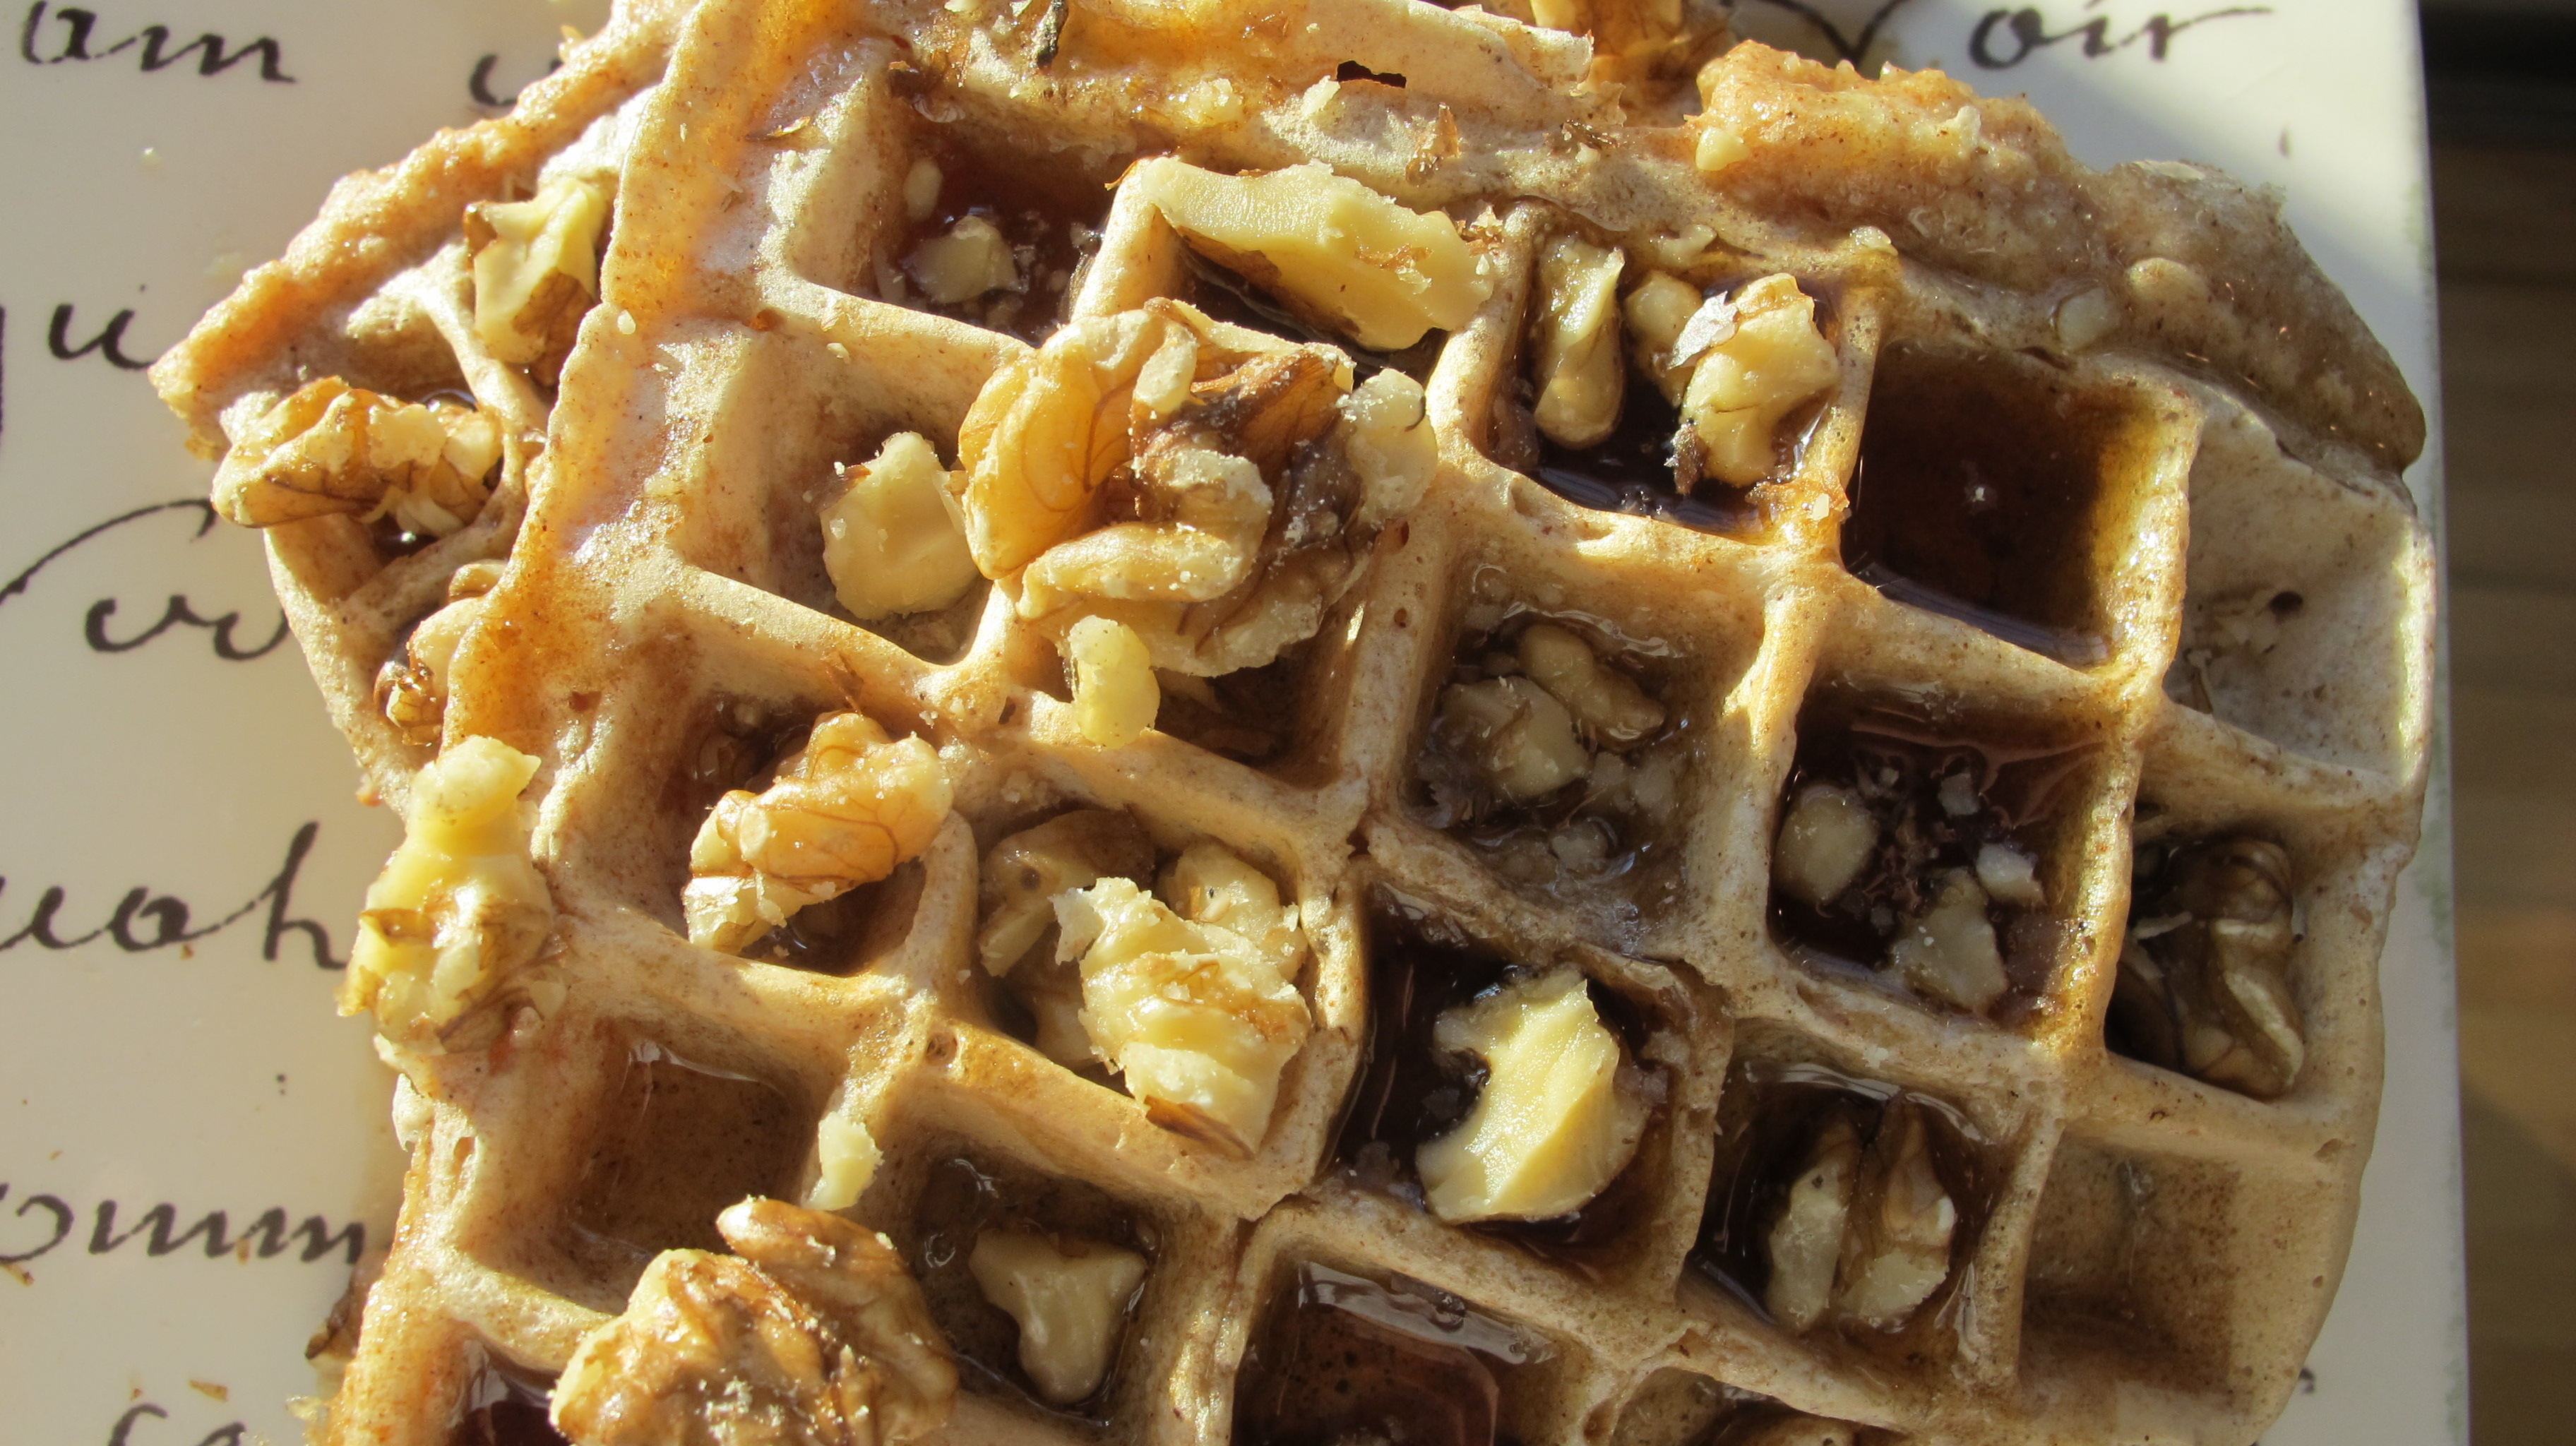 The sun rises upon these delicious apple-cinnamon waffles. 